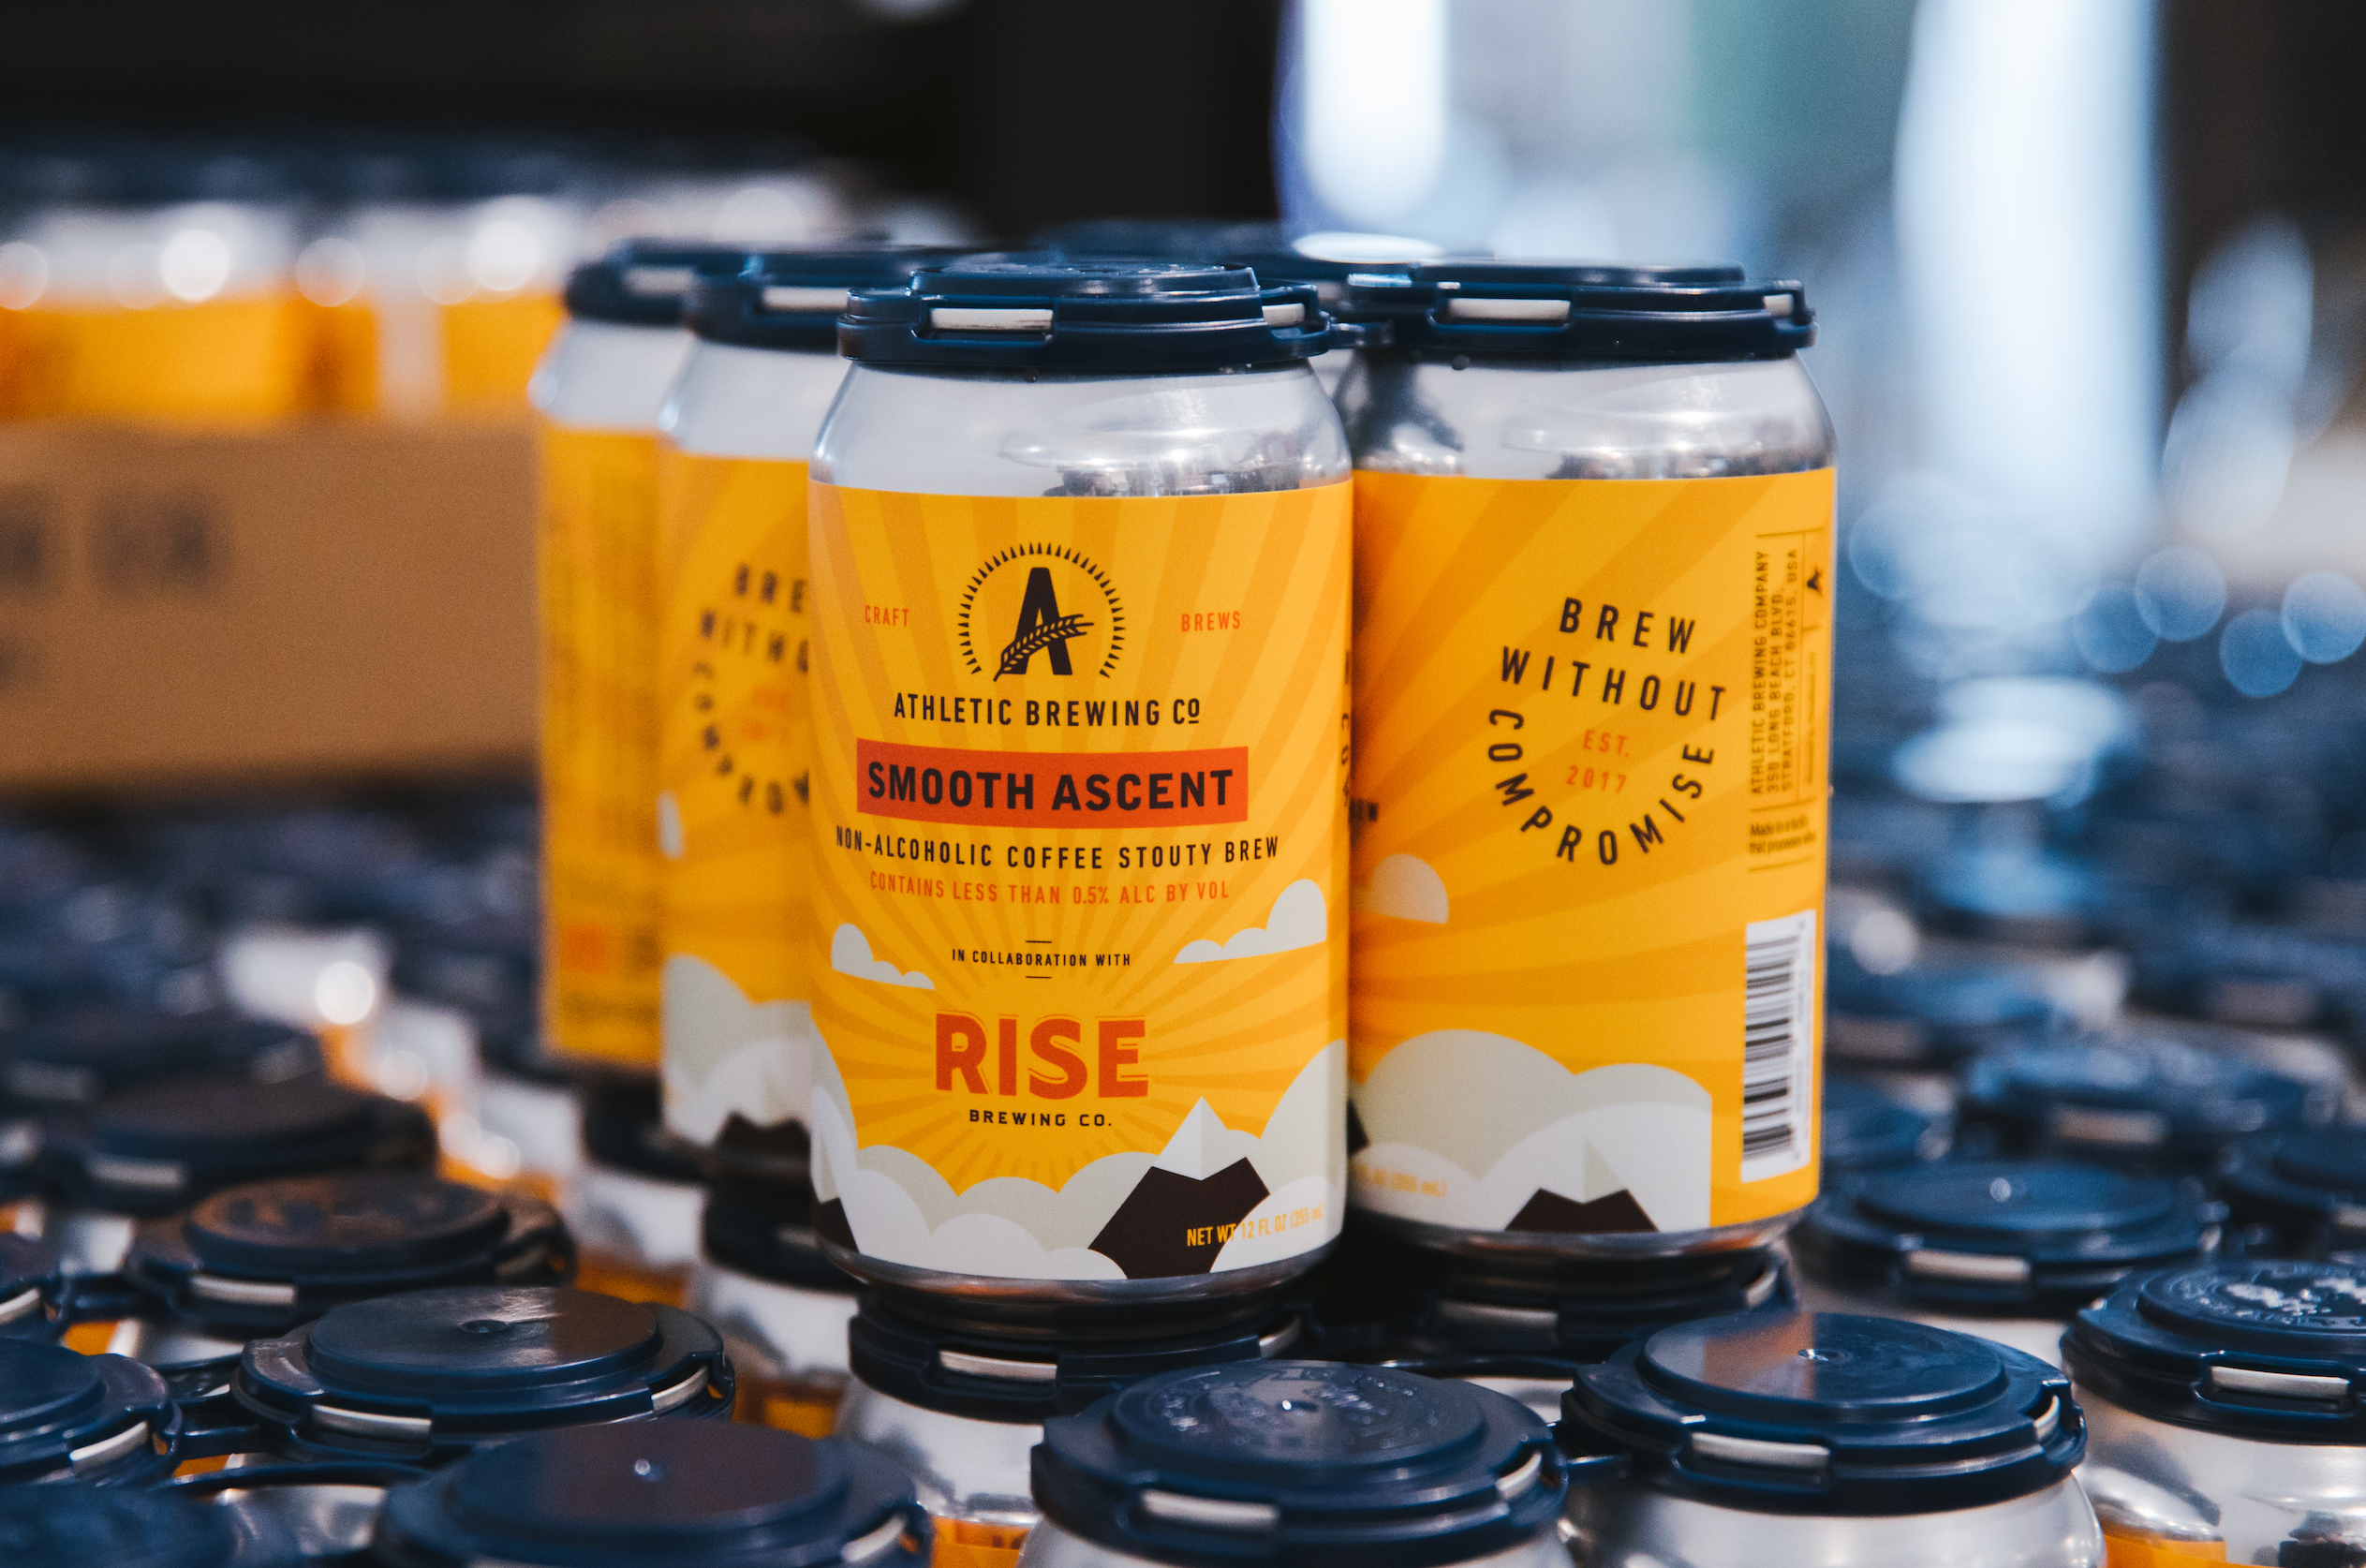 RISE Brewing Co. x Athletic Brewing Co.